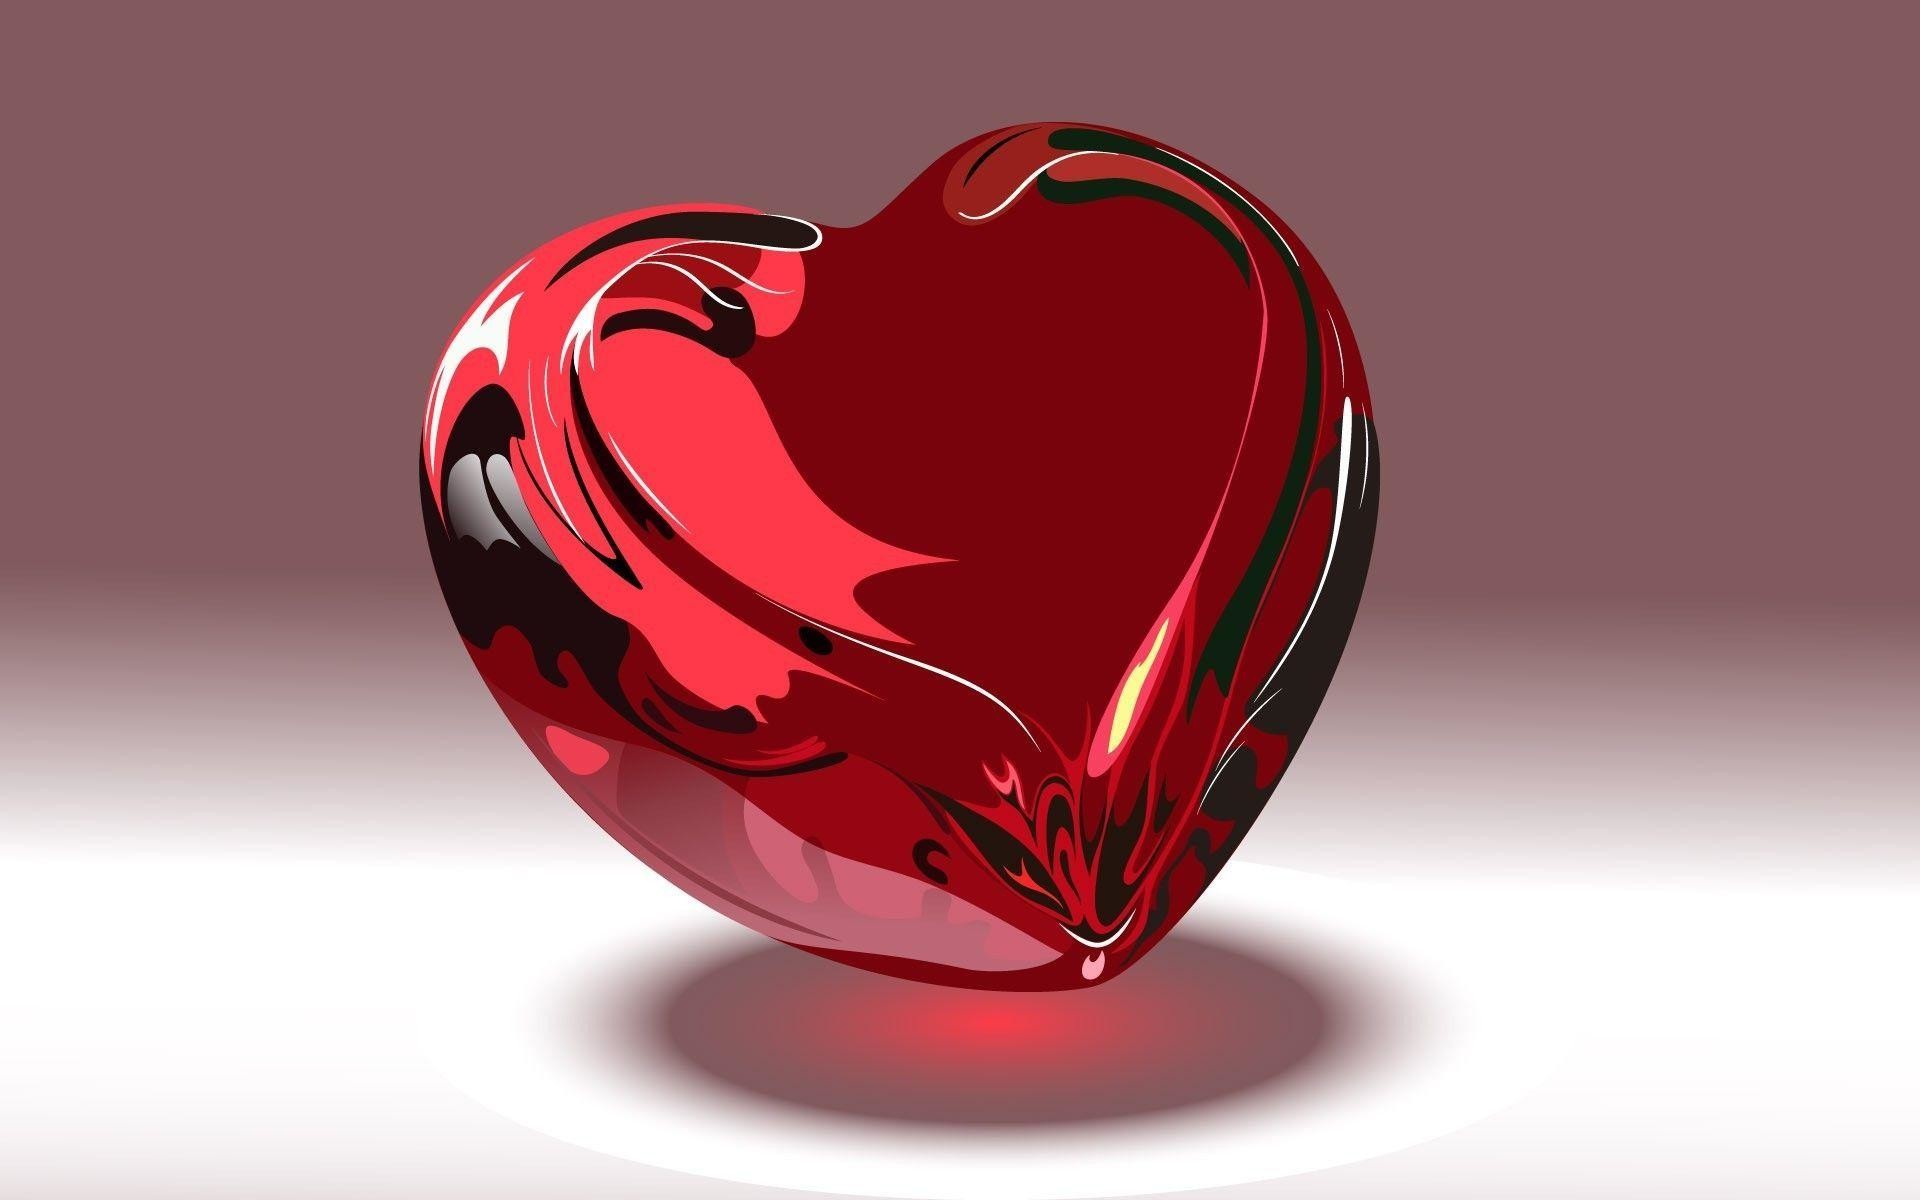 1920x1200 Love 3d Wallpapers | Free Desk Wallpapers